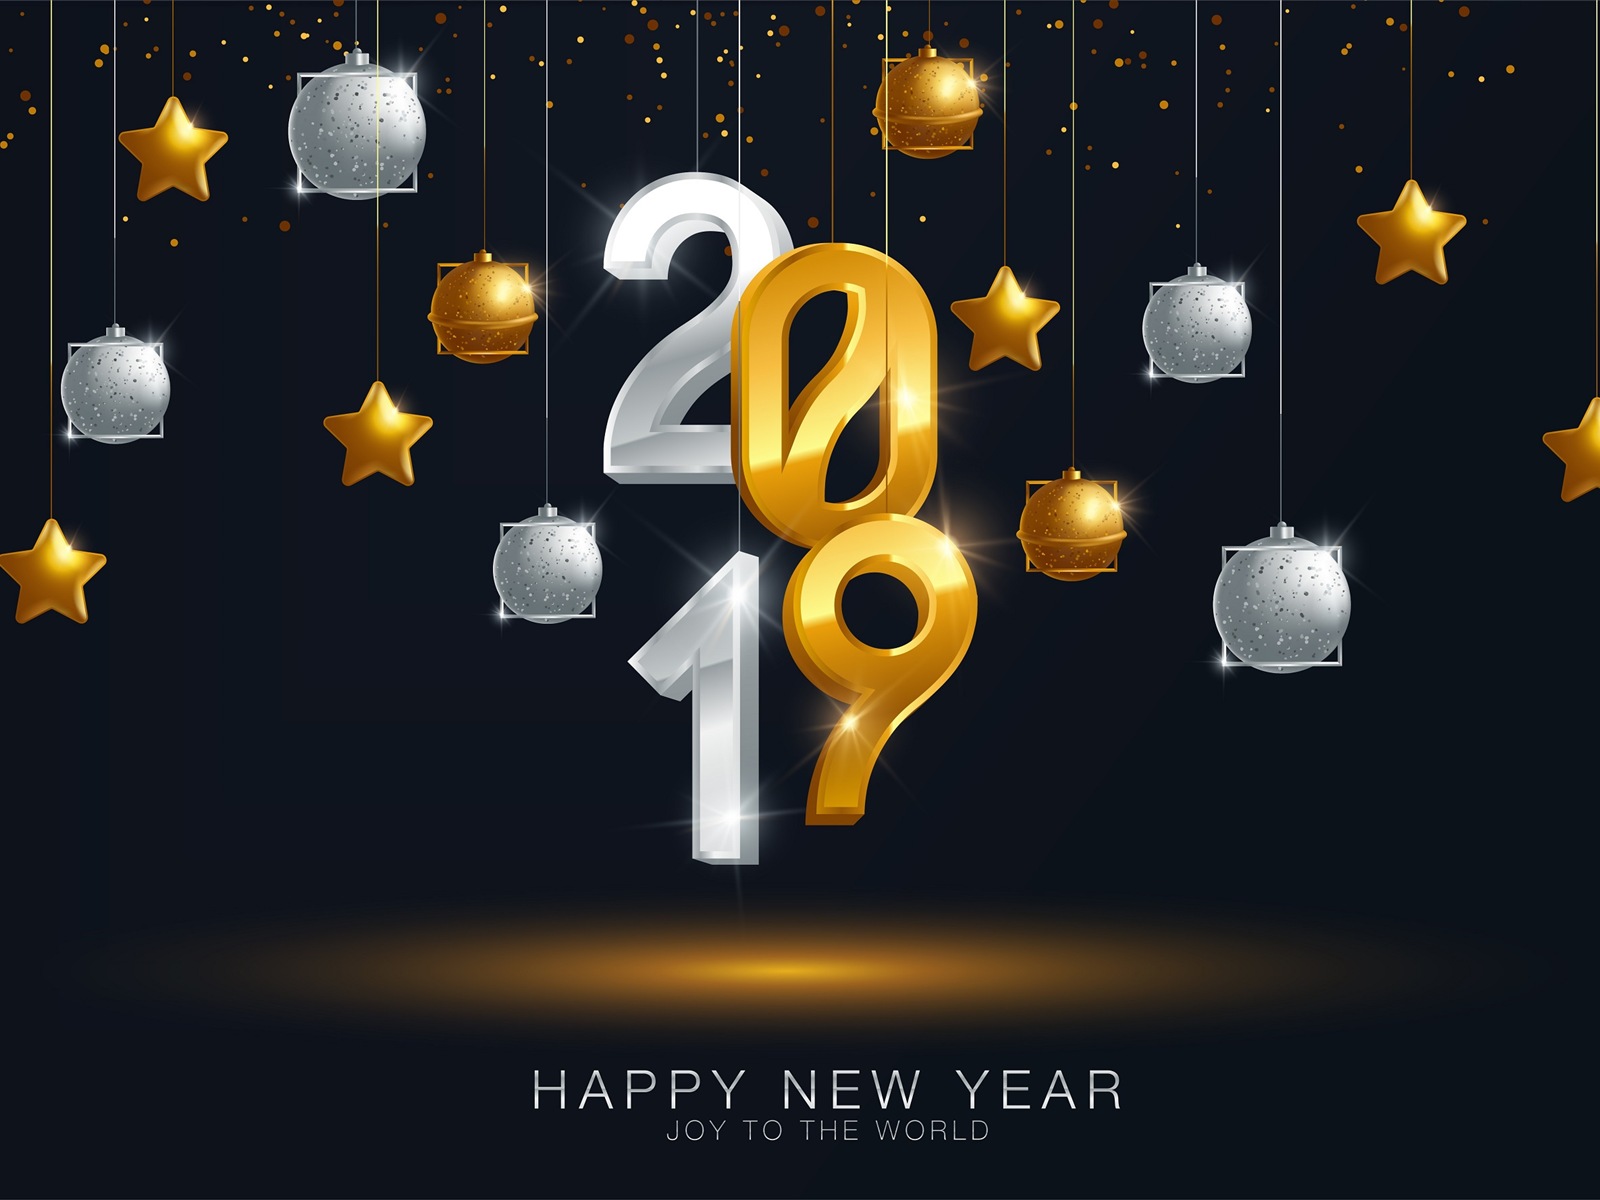 Happy New Year 2019 HD wallpapers #12 - 1600x1200